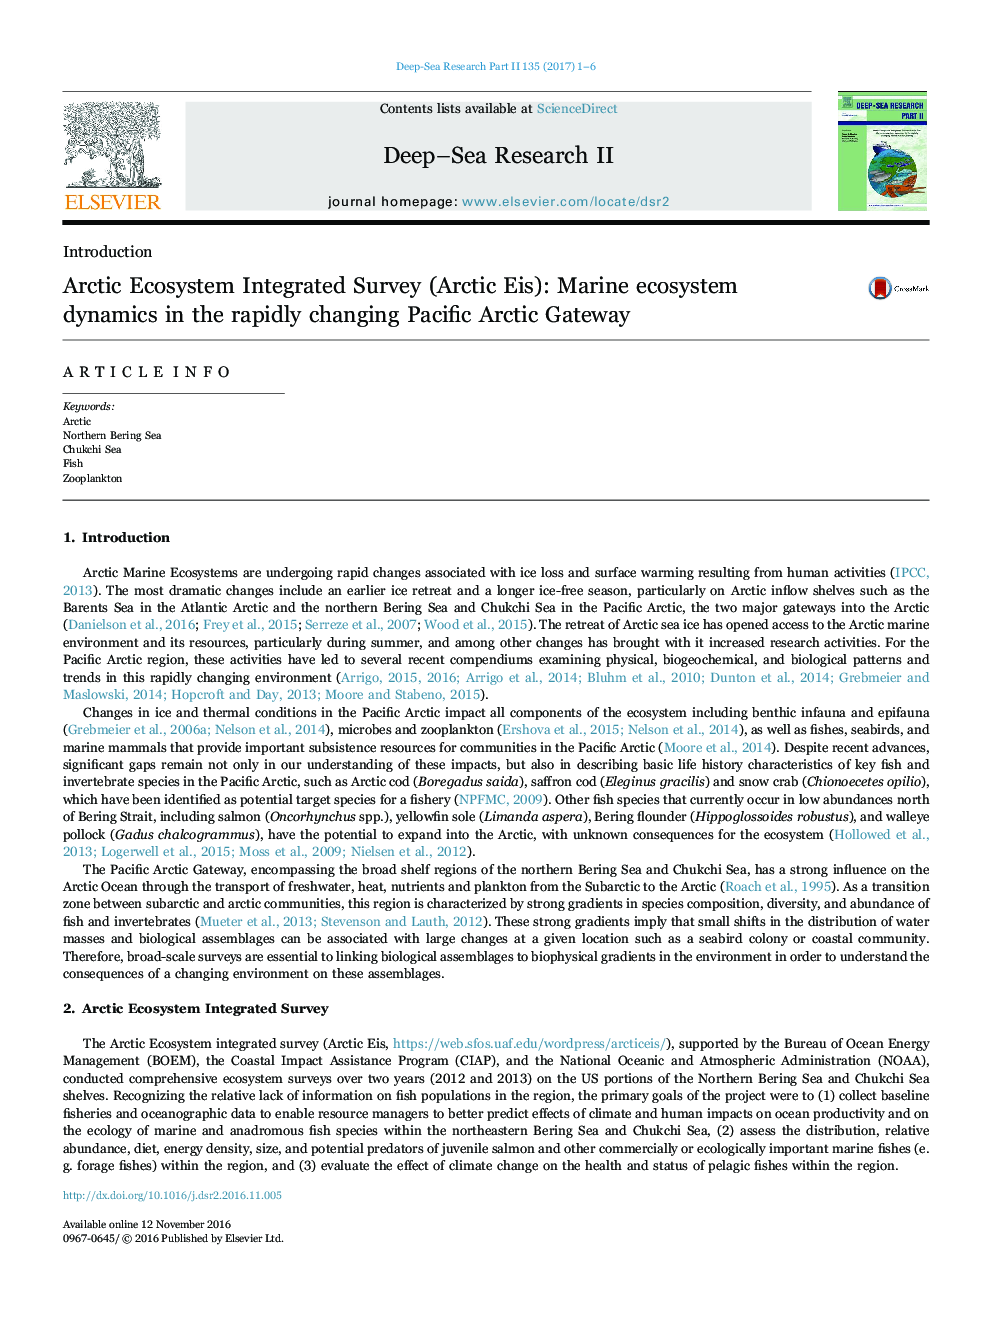 Arctic Ecosystem Integrated Survey (Arctic Eis): Marine ecosystem dynamics in the rapidly changing Pacific Arctic Gateway